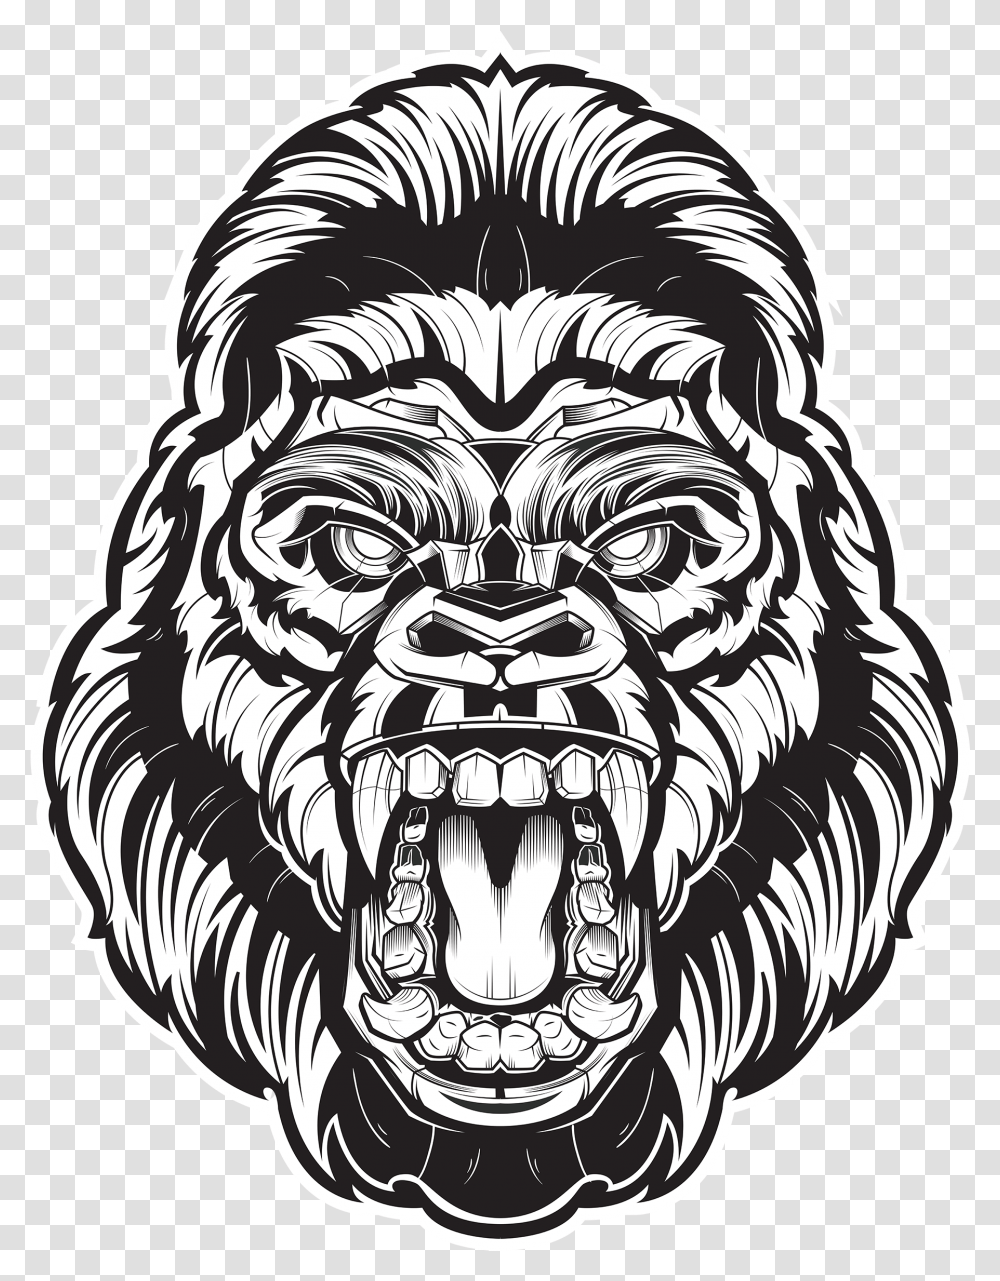 Angry Gorilla Face Clipart Download Angry Gorilla Clip Art, Statue, Sculpture, Ornament, Gargoyle Transparent Png